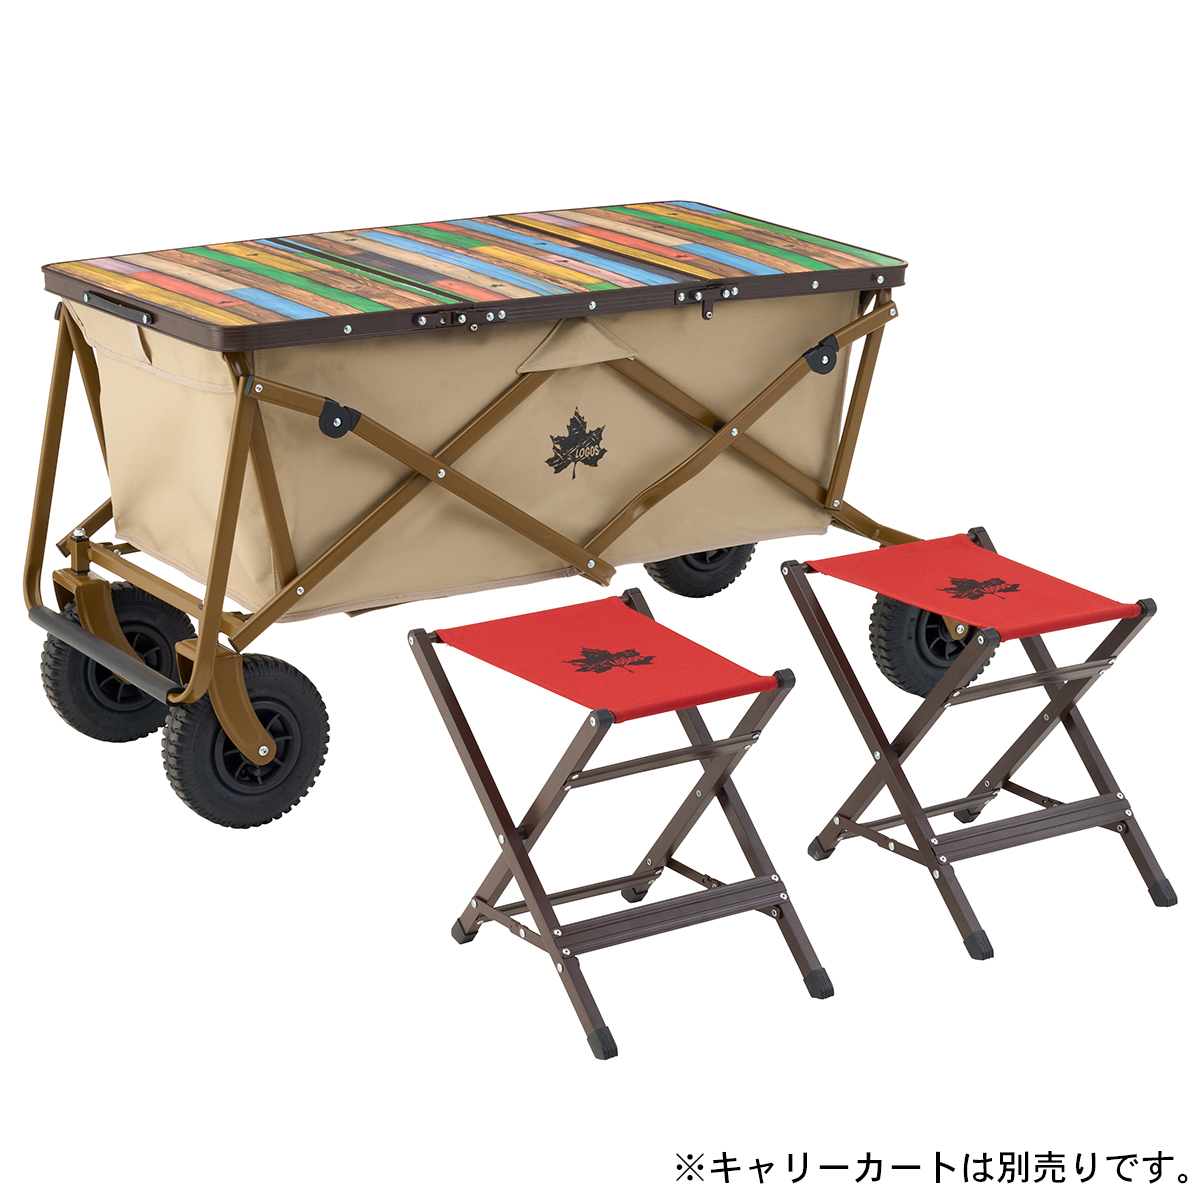 Old Wooden 丸洗いカートテーブルセット2|ギア|家具|セット|製品 